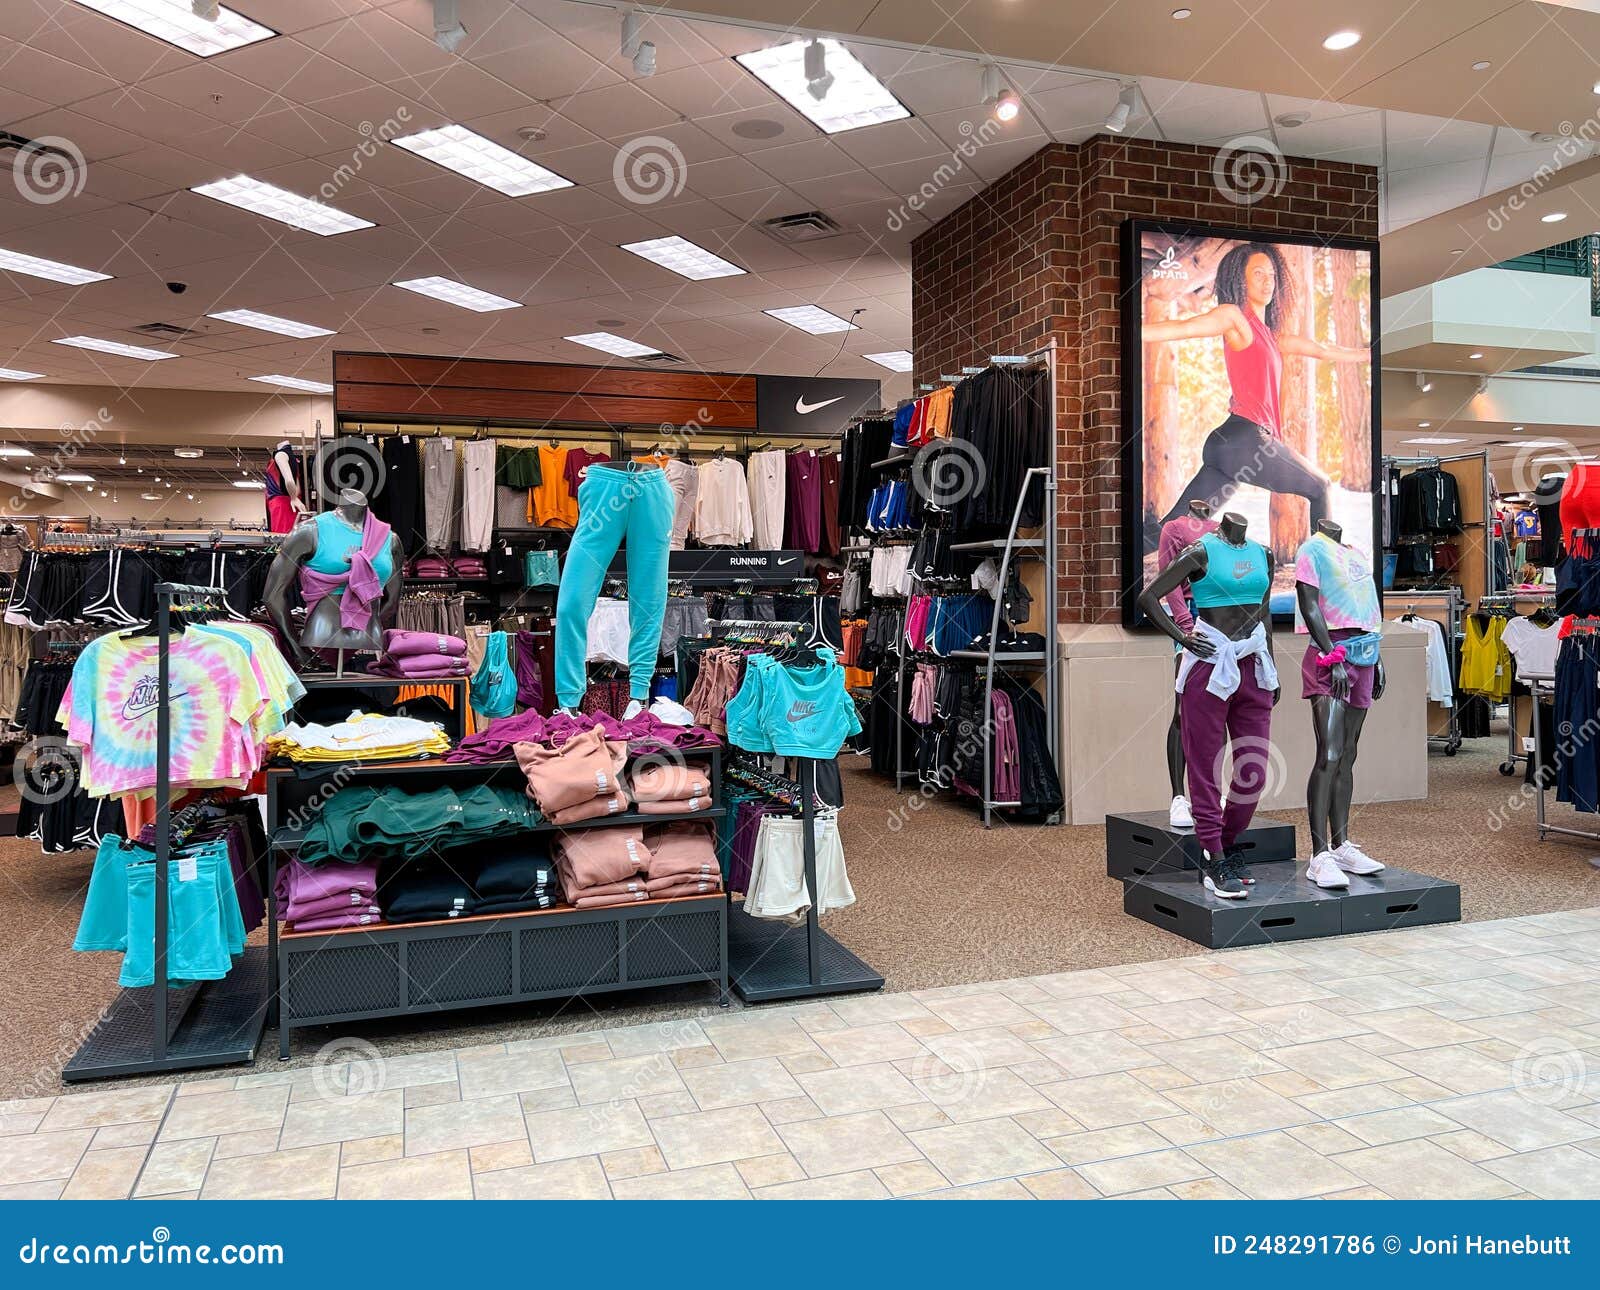 A Display of Womens Nike Clothing for Sale at the Scheels Sporting Goods  Store in Springfield, Illinois Editorial Photo - Image of scheels, athlete:  248291786